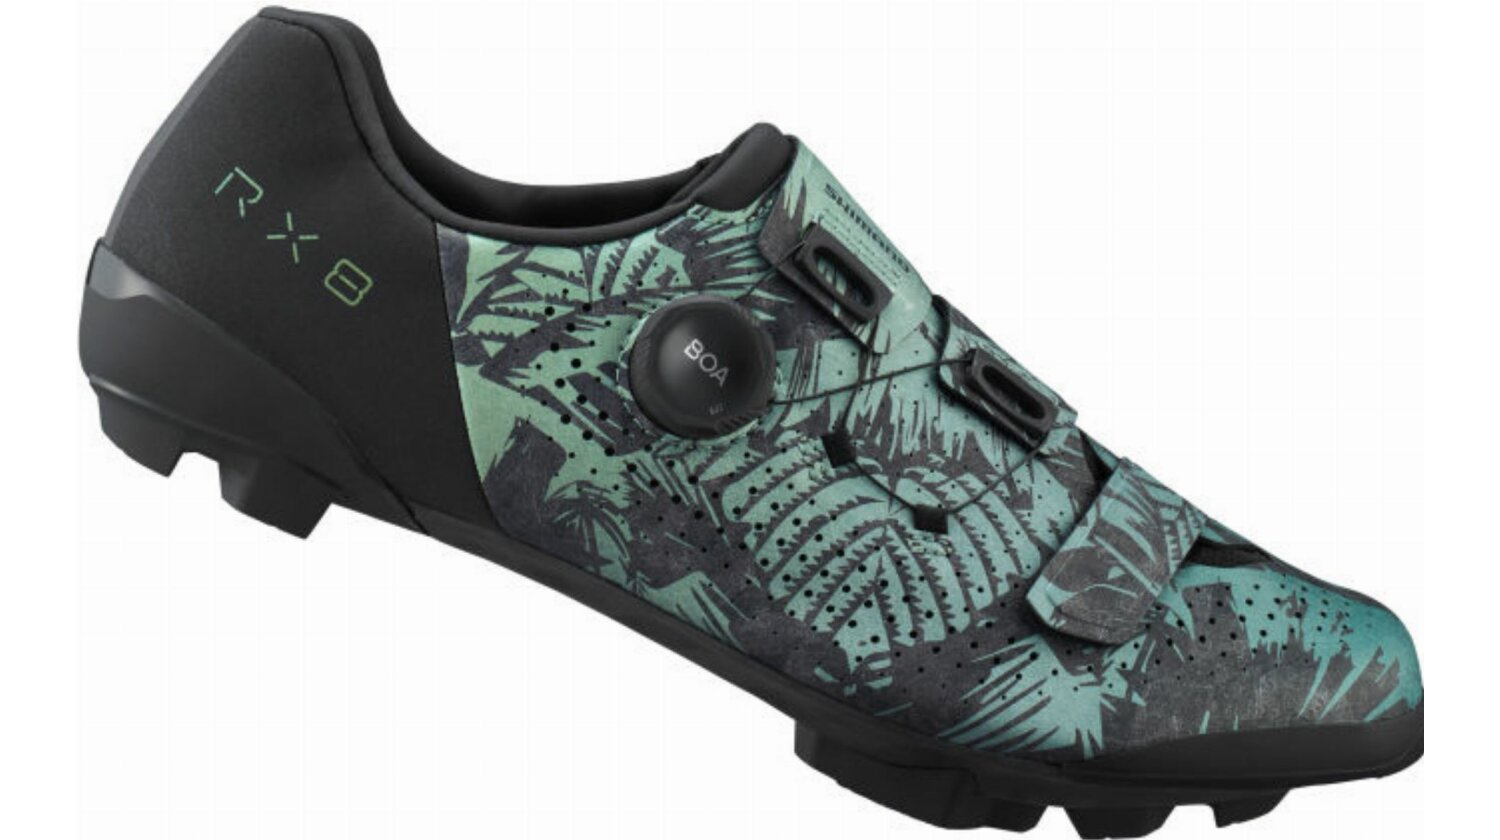 Shimano RX801 Gravel-Schuhe Tropical Leaves